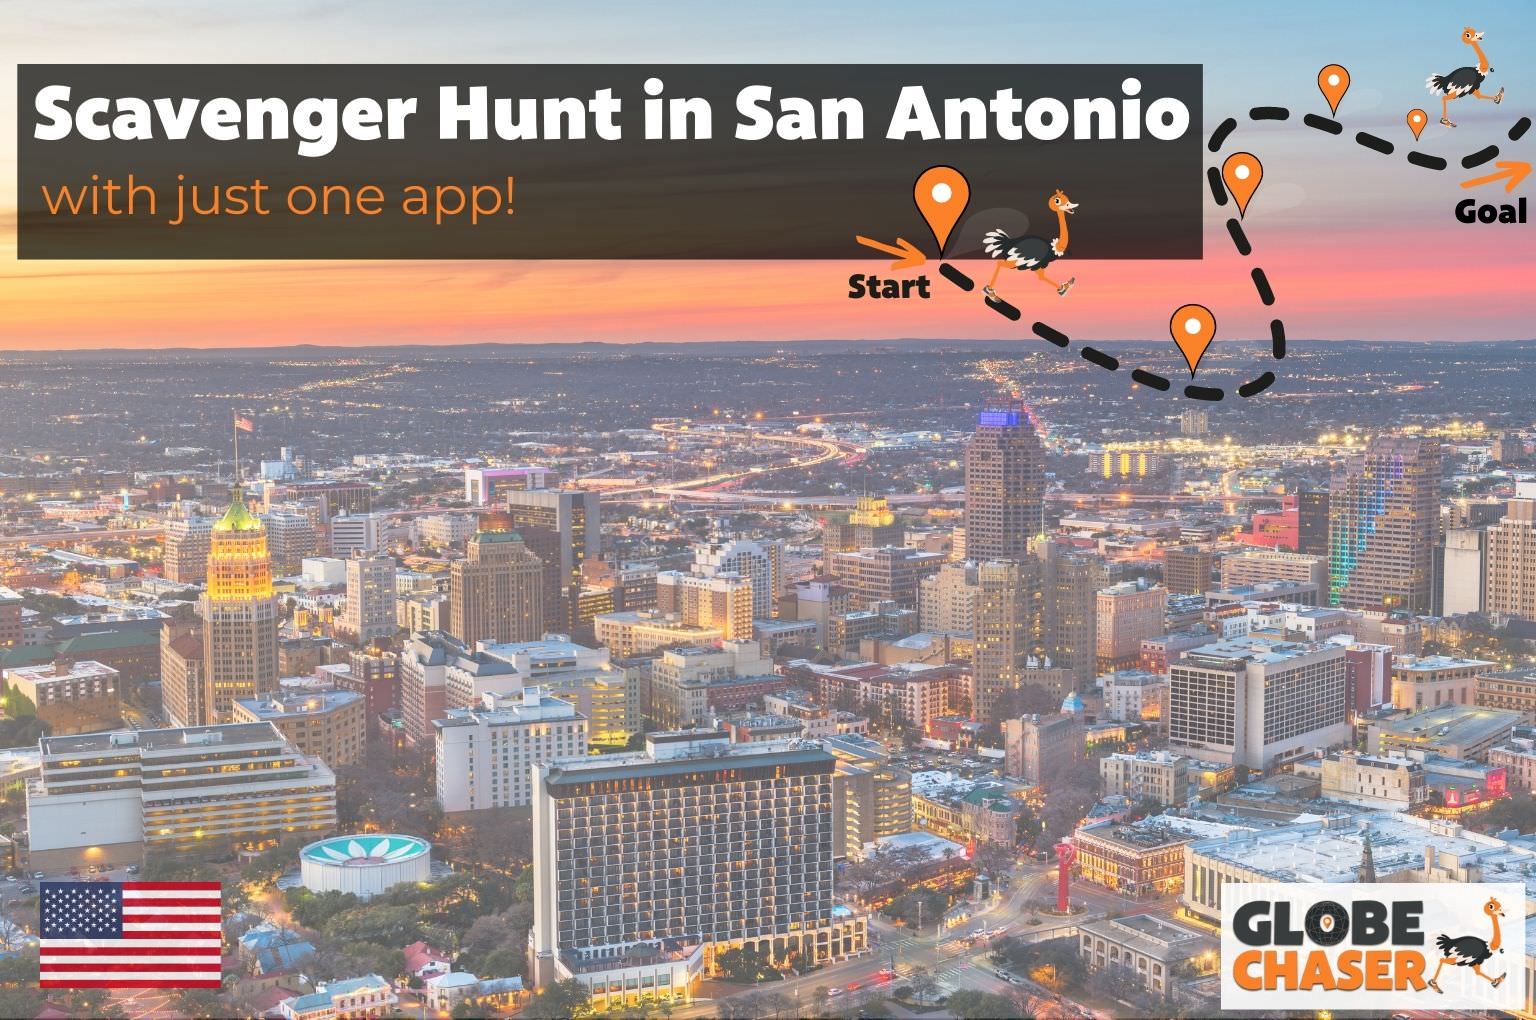 Scavenger Hunt in San Antonio, USA - Family Activities with the Globe Chaser App for Outdoor Fun